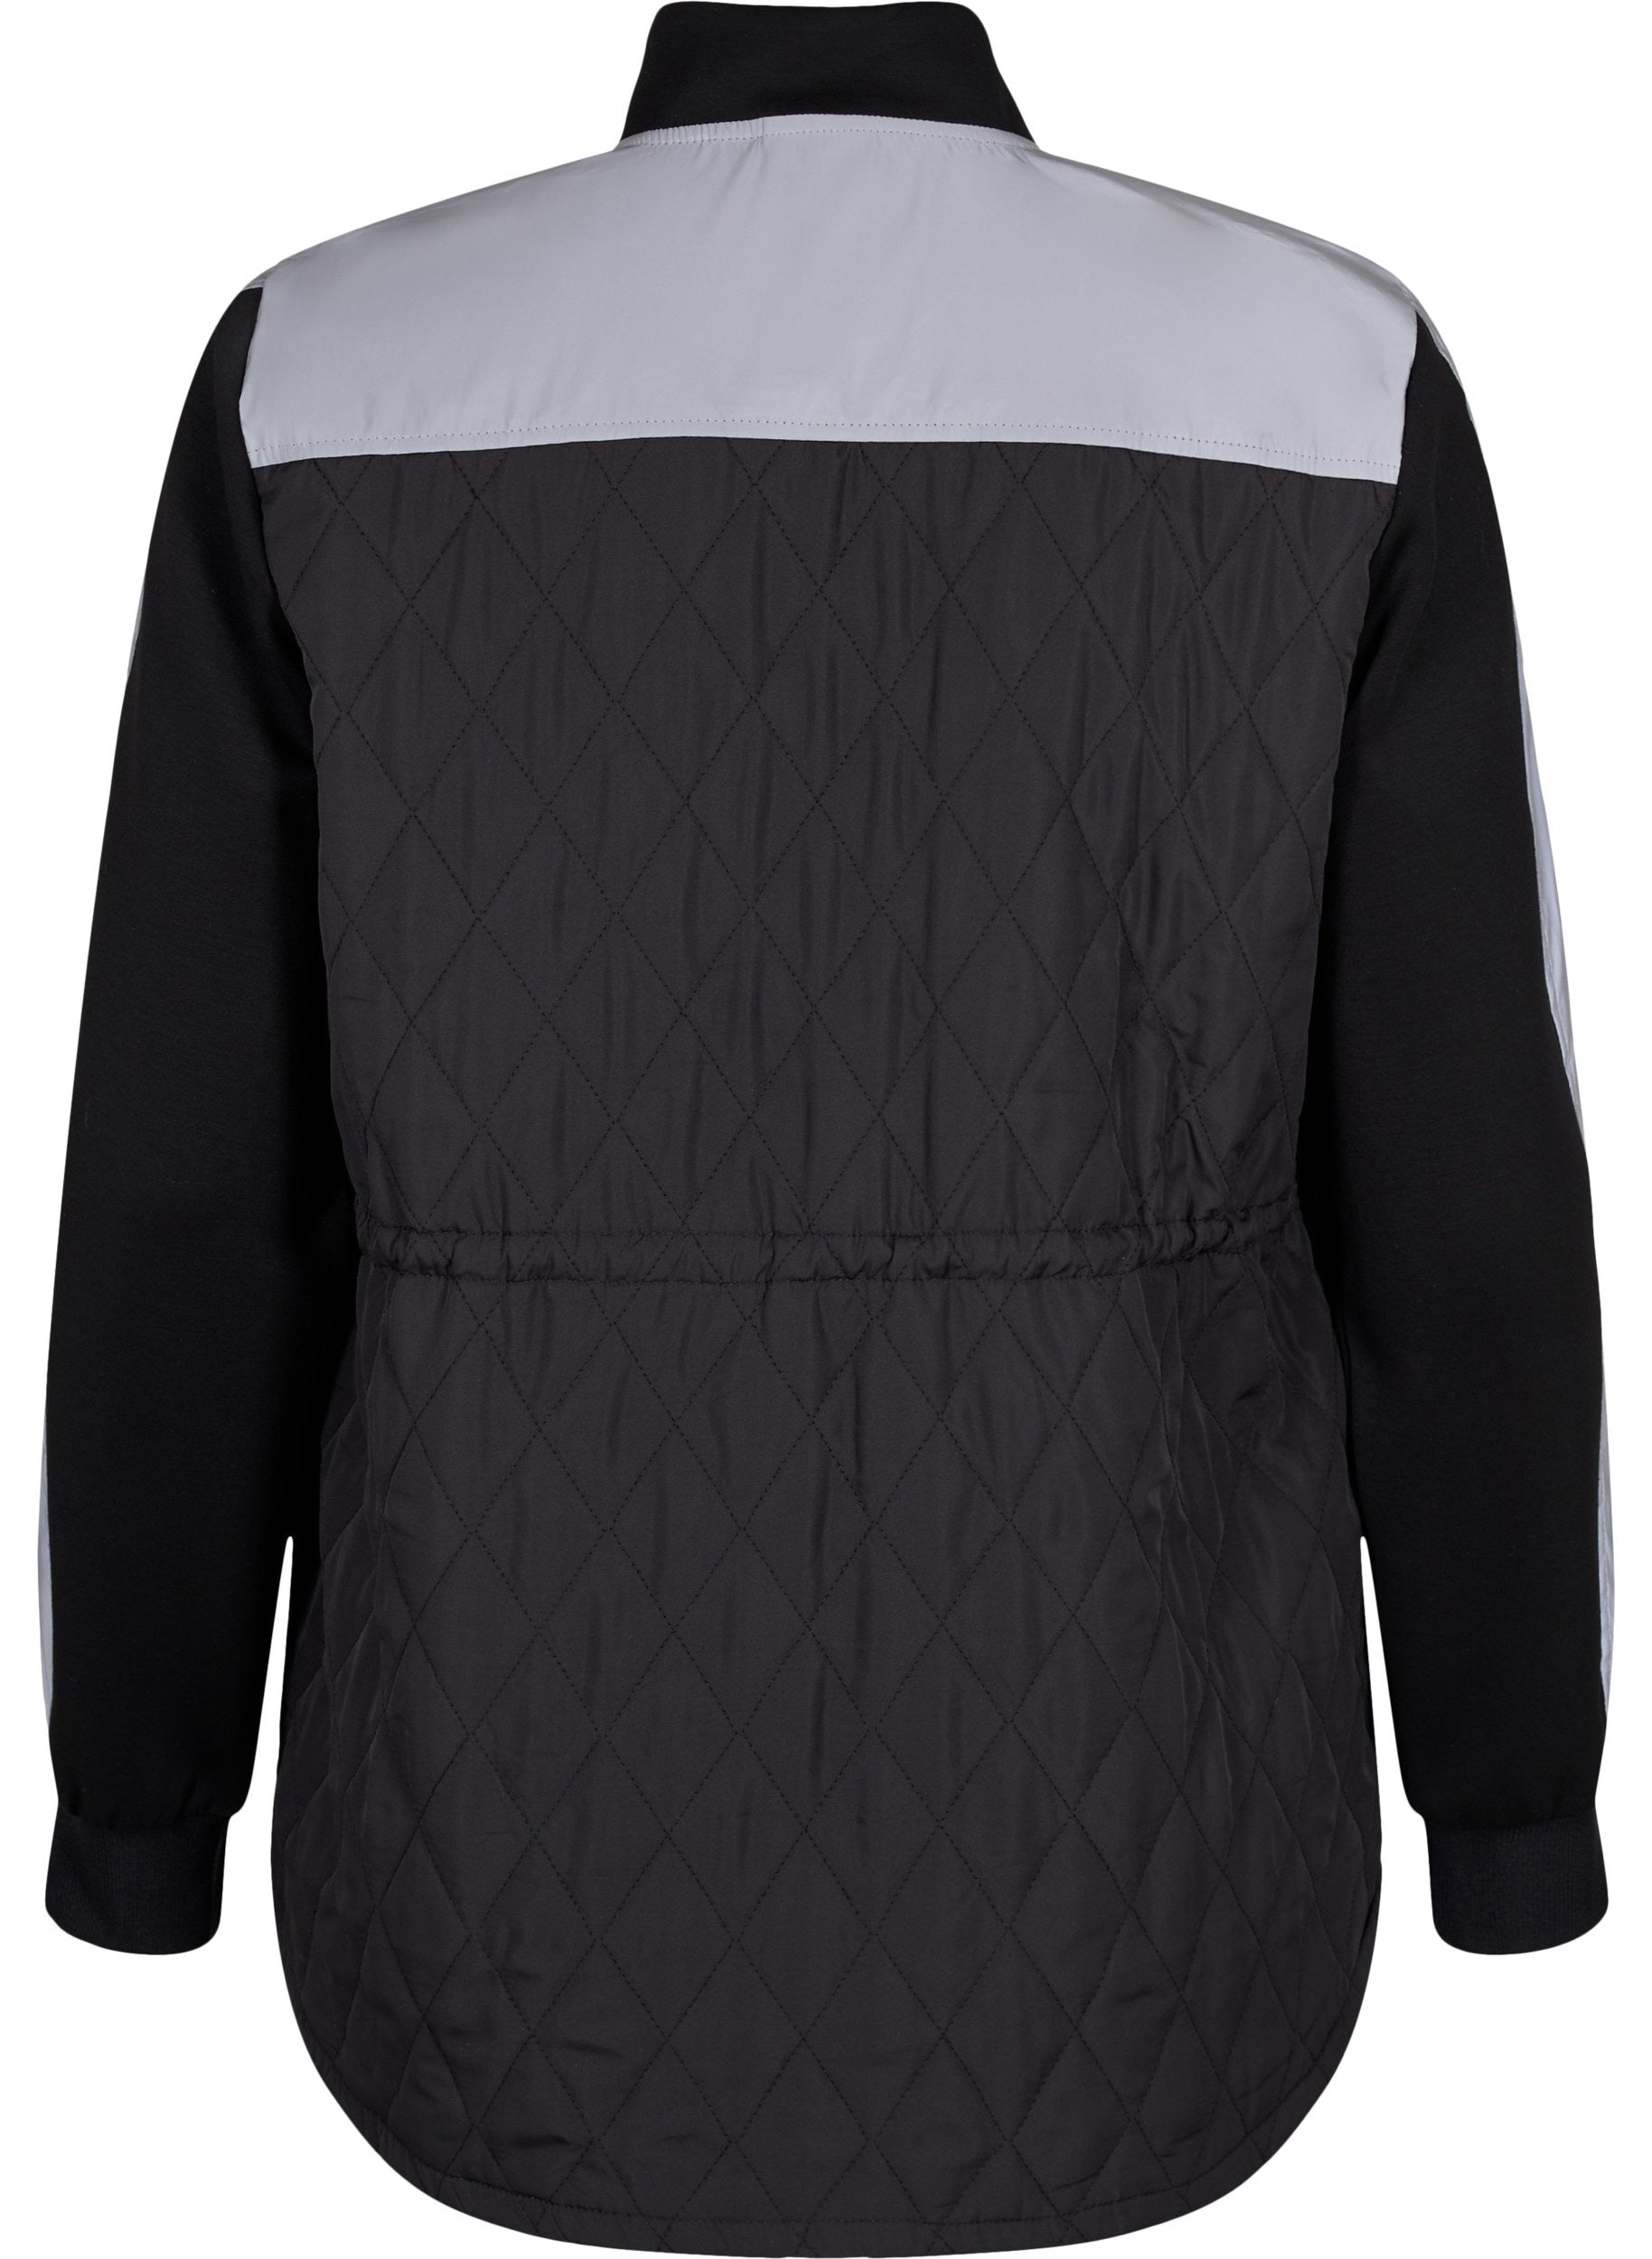 ZiAHILL -L/S -QUILY REFLEX JACKET